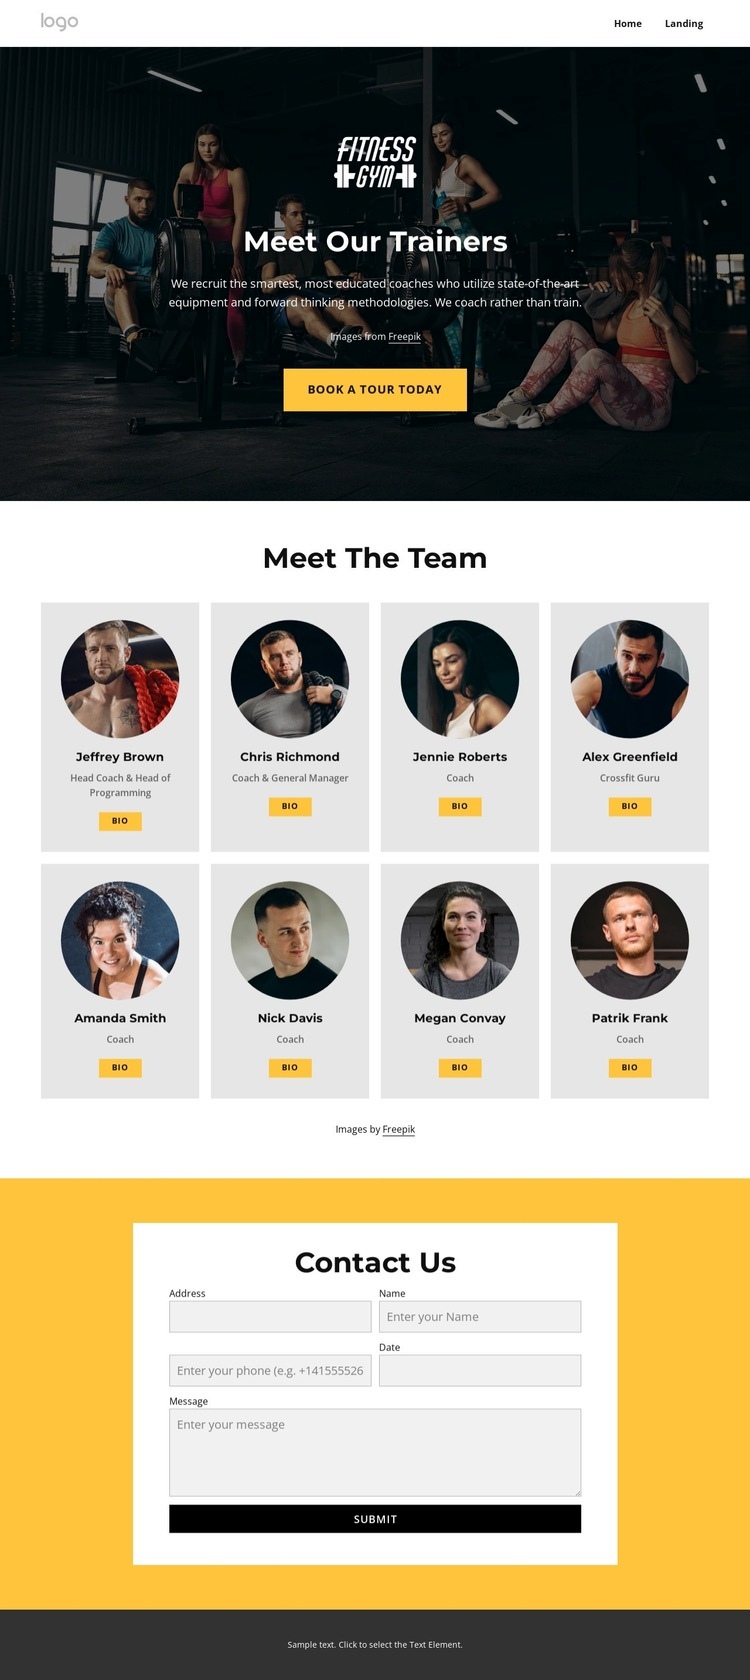 Meet our trainers Wix Template Alternative